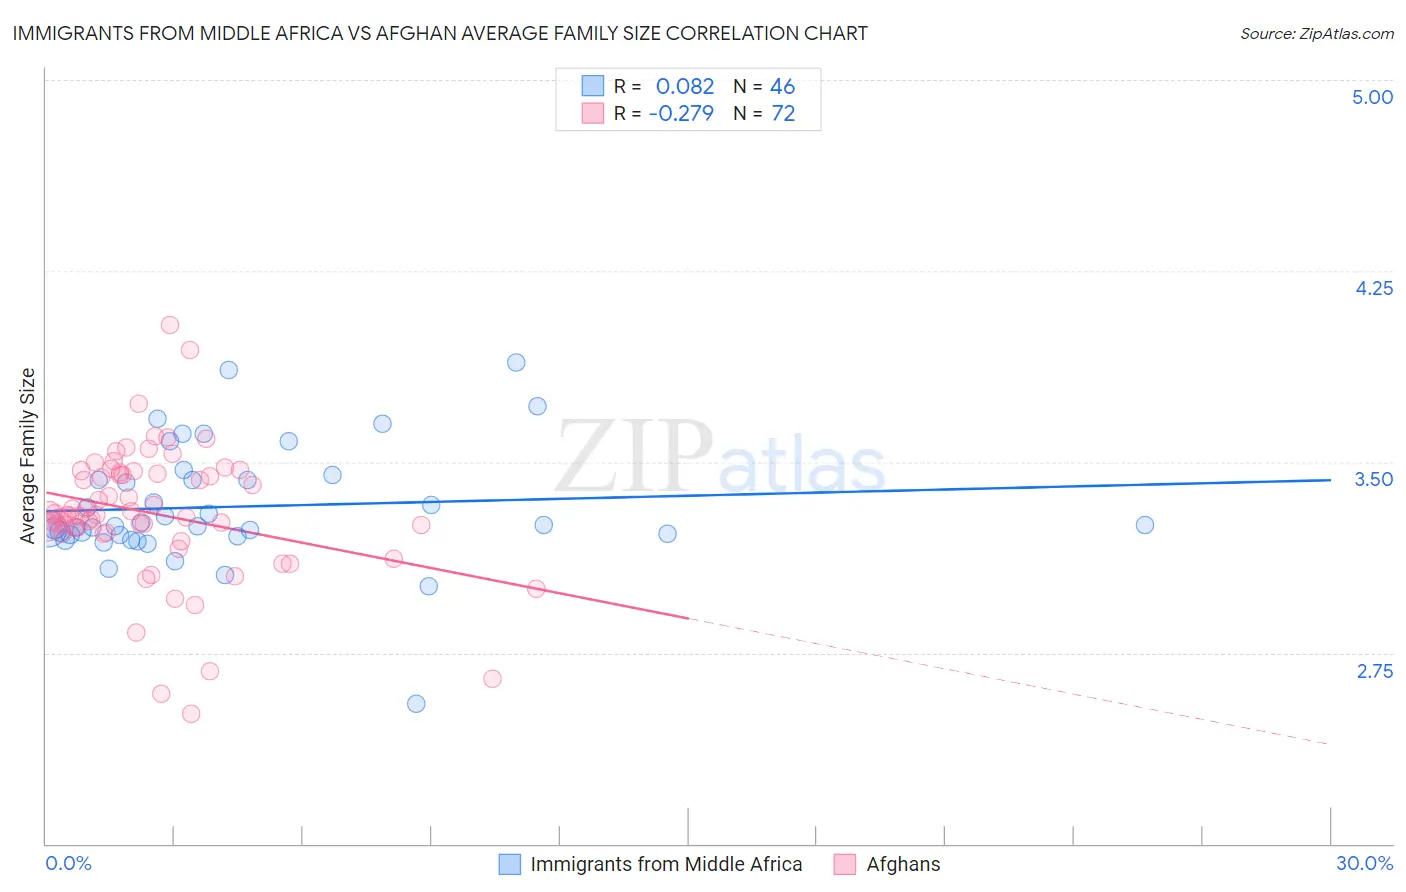 Immigrants from Middle Africa vs Afghan Average Family Size